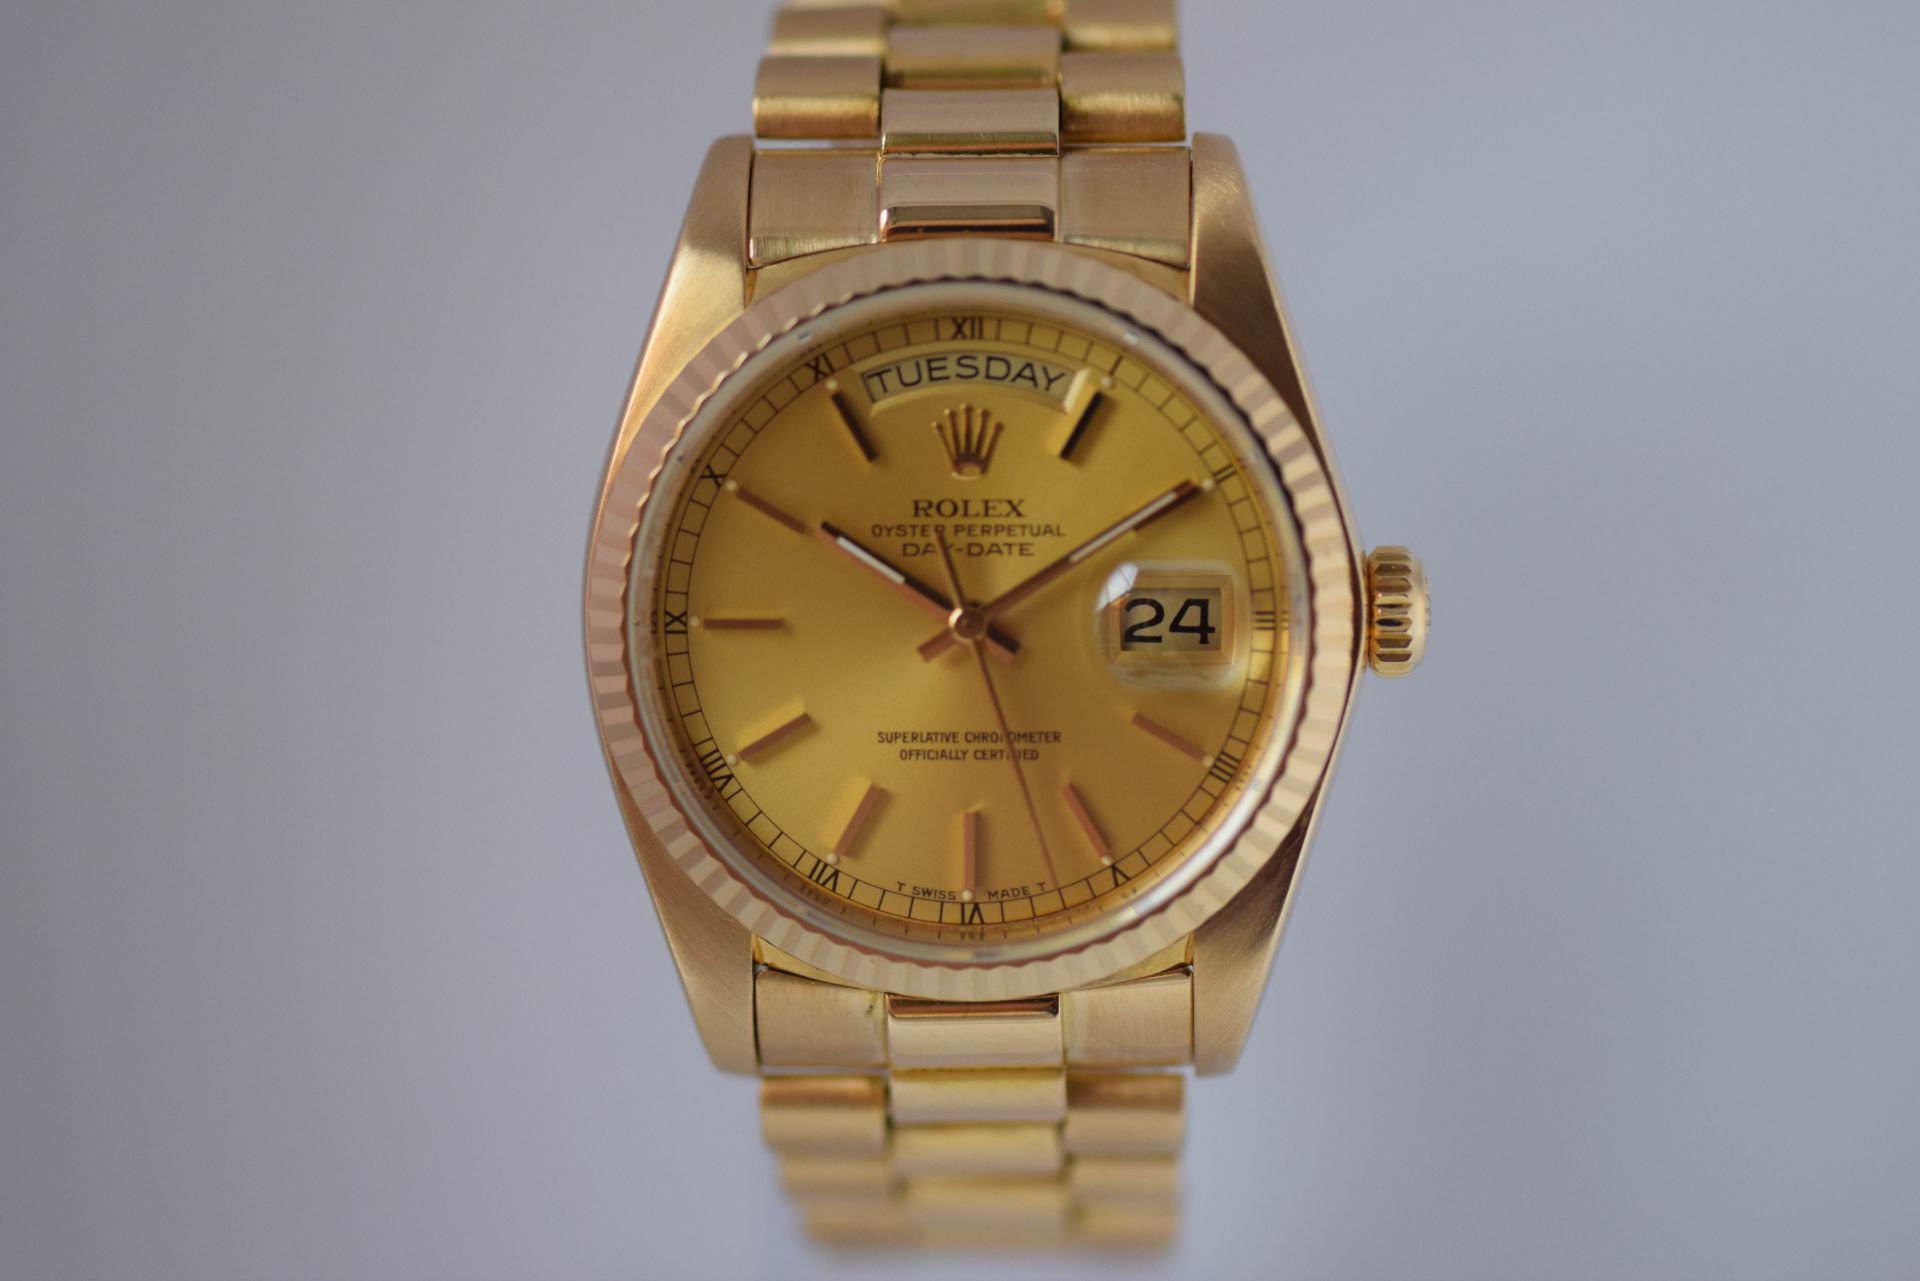 Rolex day date president 18ct solid gold.